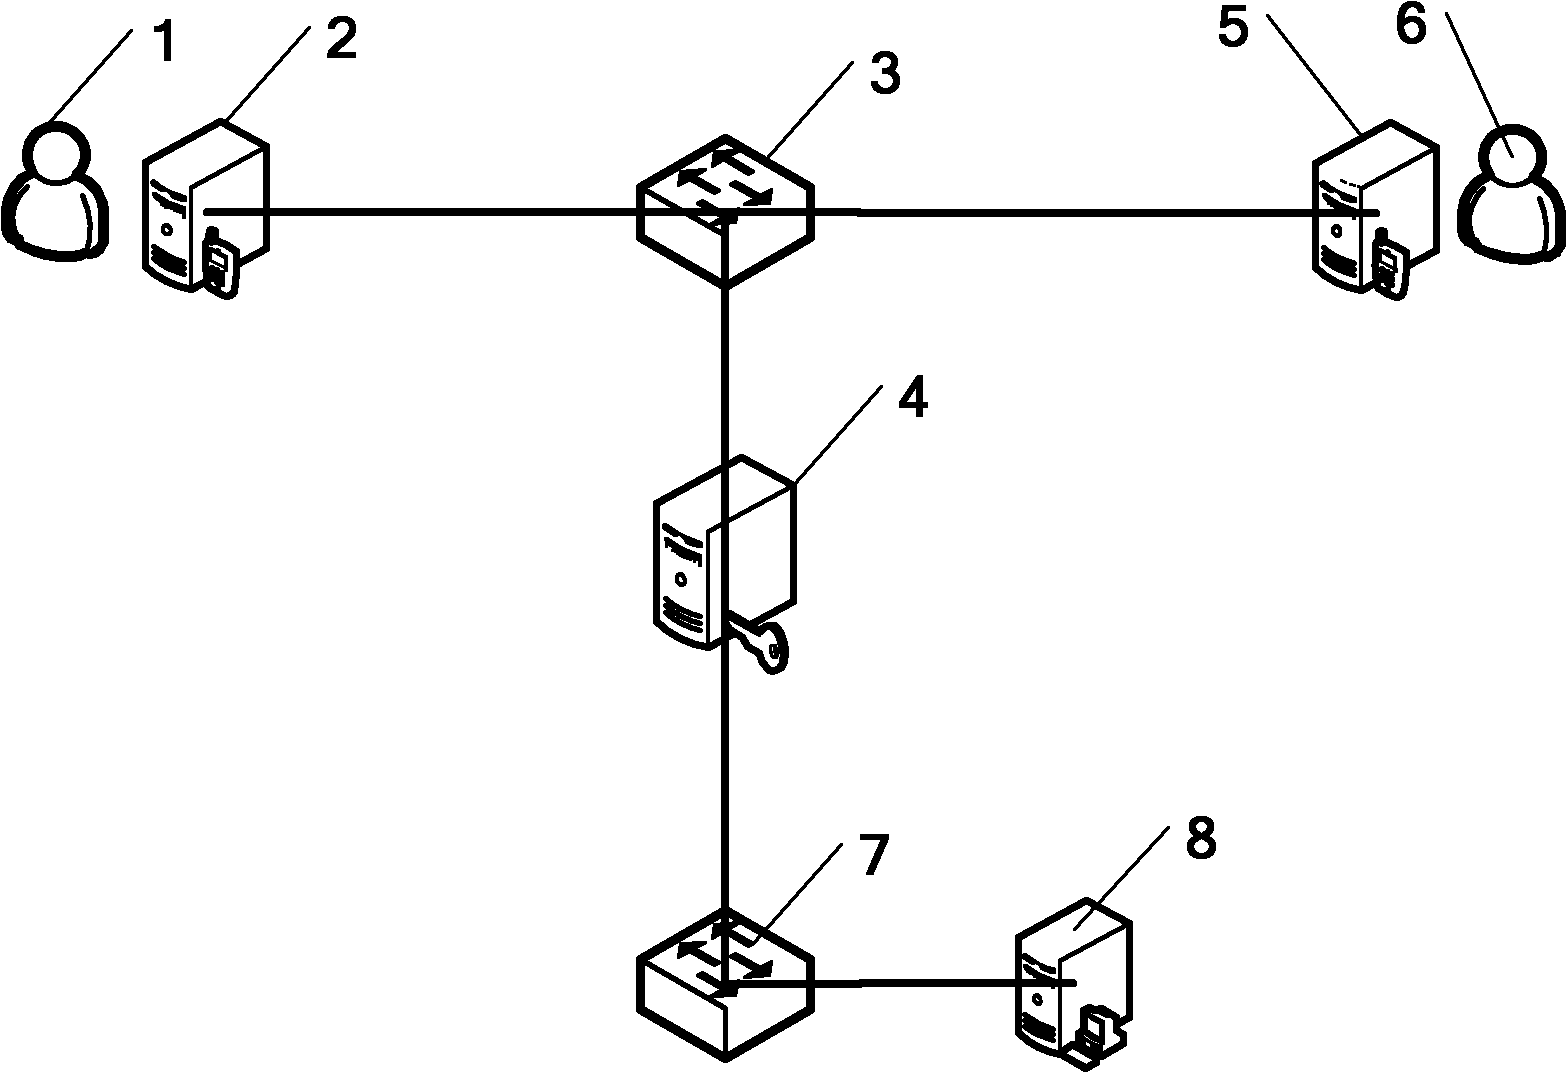 System and method for transforming small orders